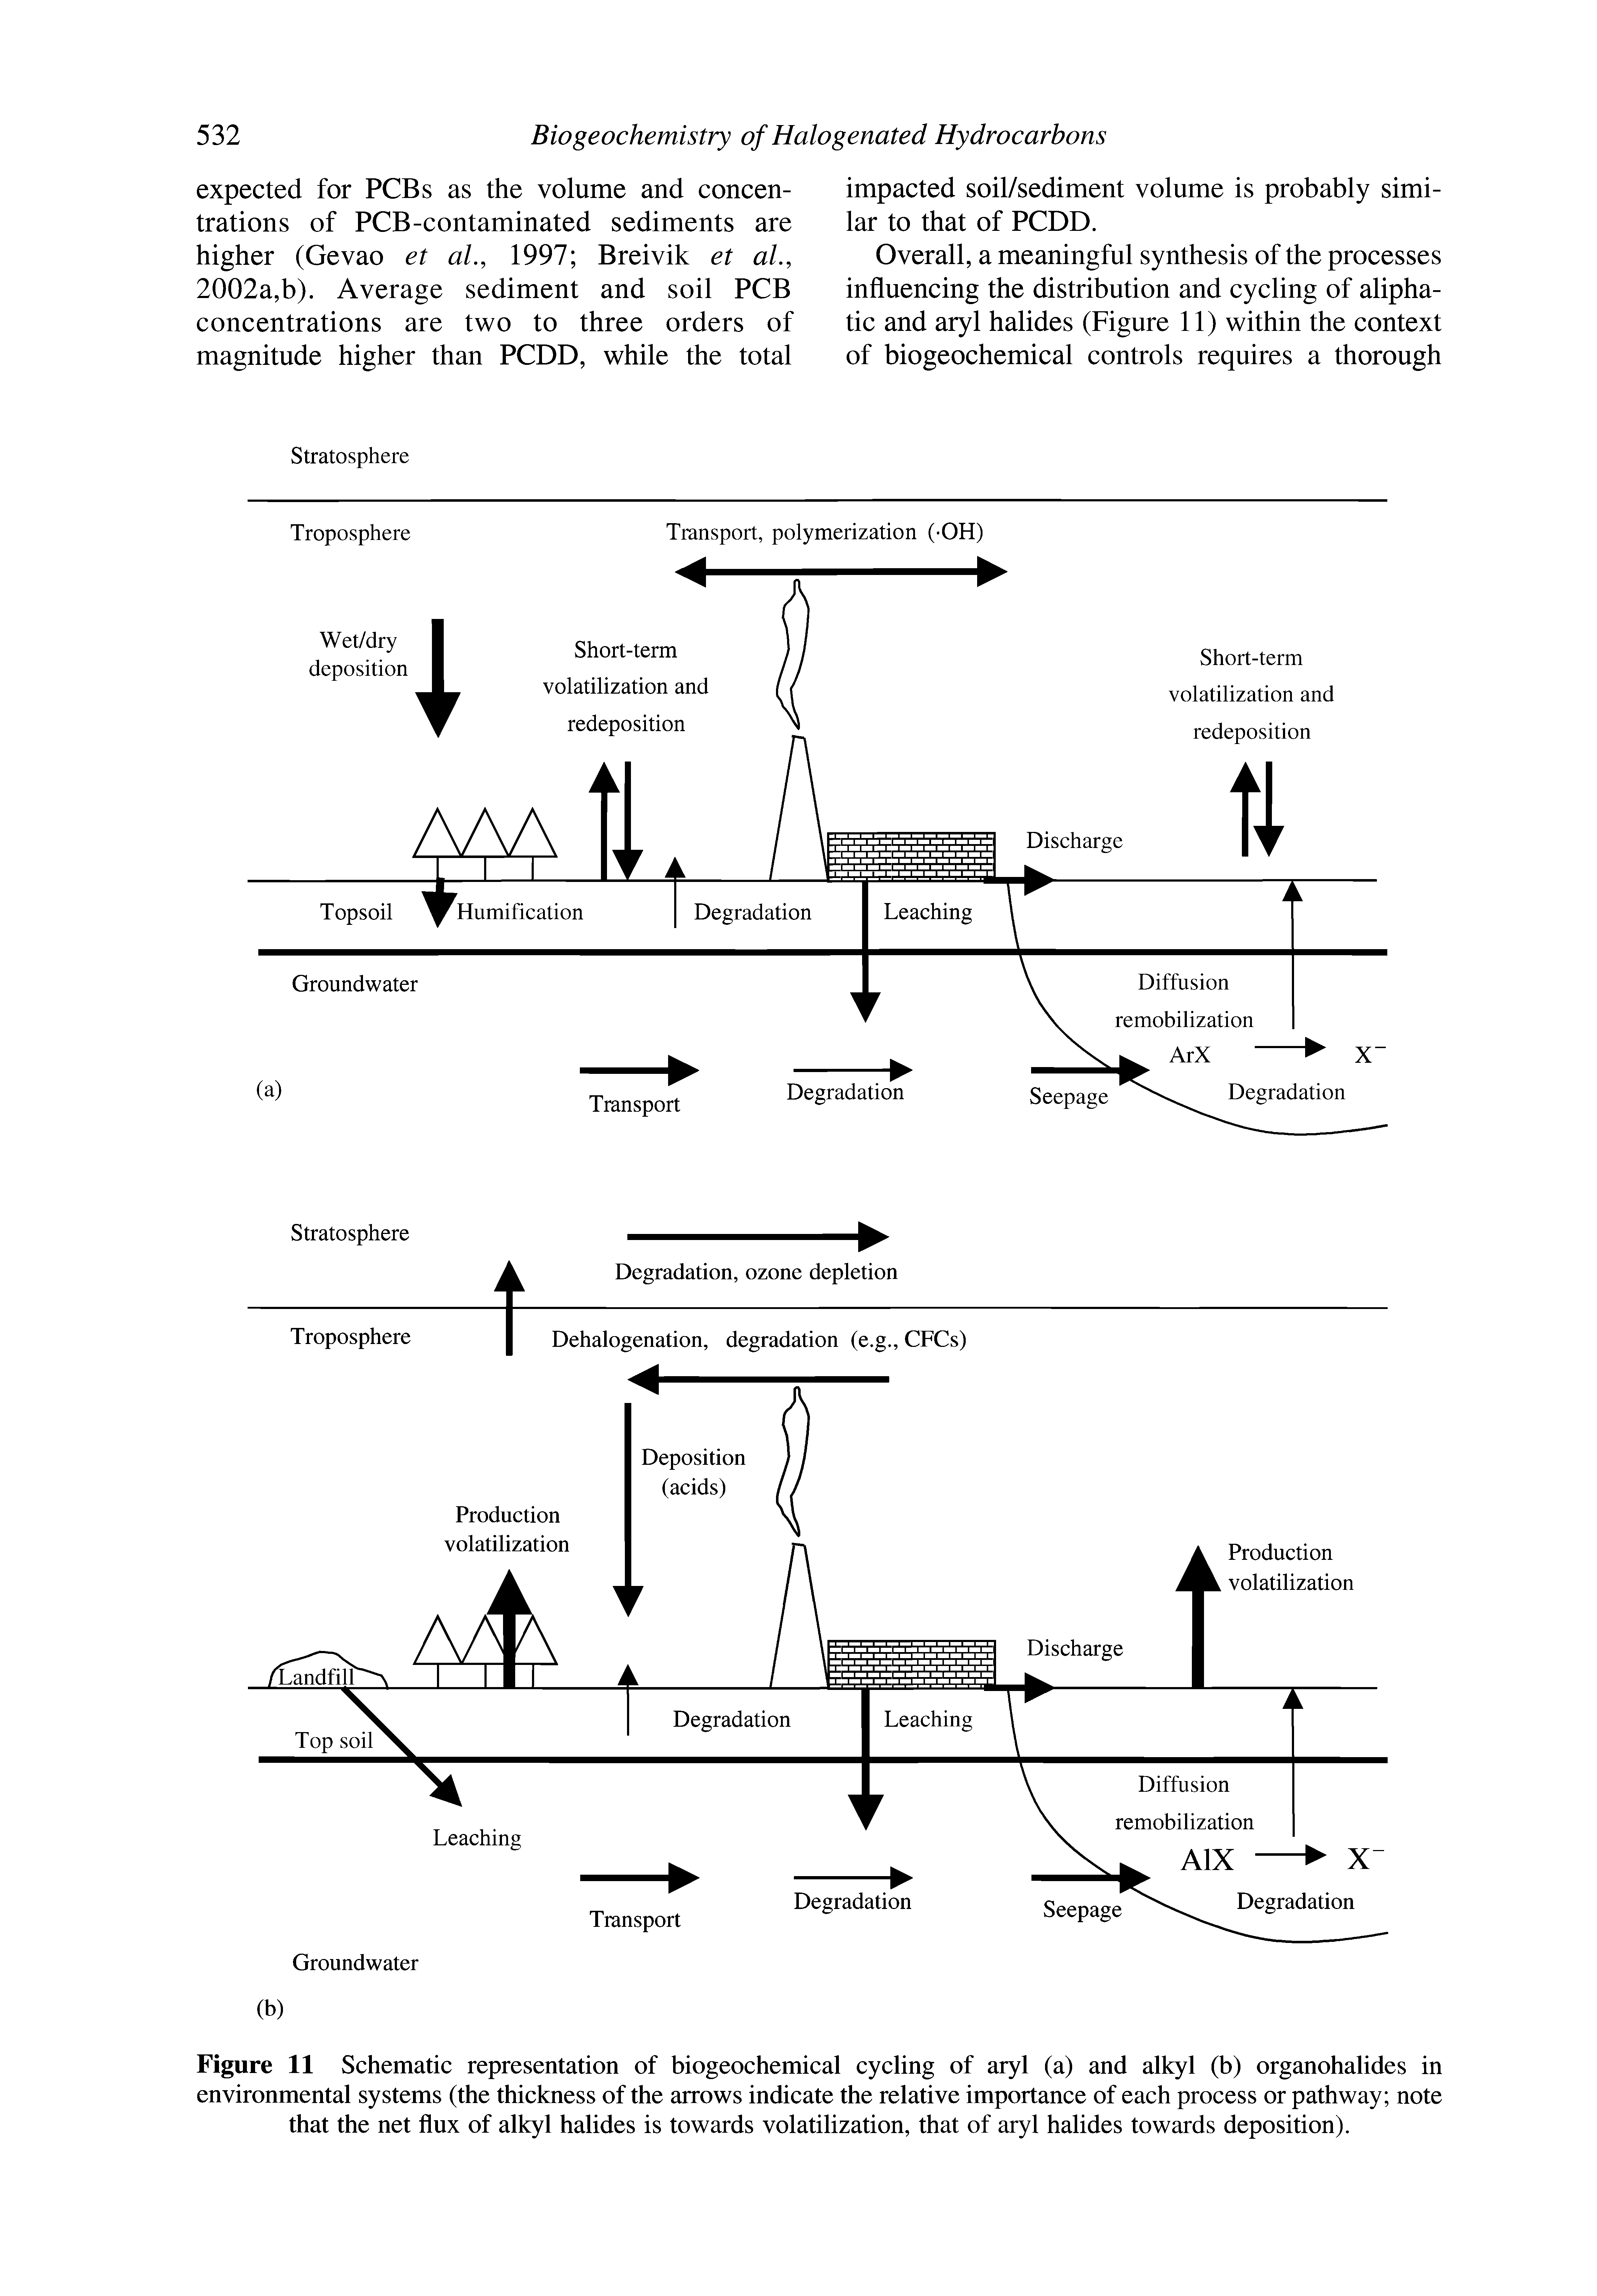 Figure 11 Schematic representation of biogeochemical cycling of aryl (a) and alkyl (b) organohalides in environmental systems (the thickness of the arrows indicate the relative importance of each process or pathway note that the net flux of alkyl halides is towards volatilization, that of aryl halides towards deposition).